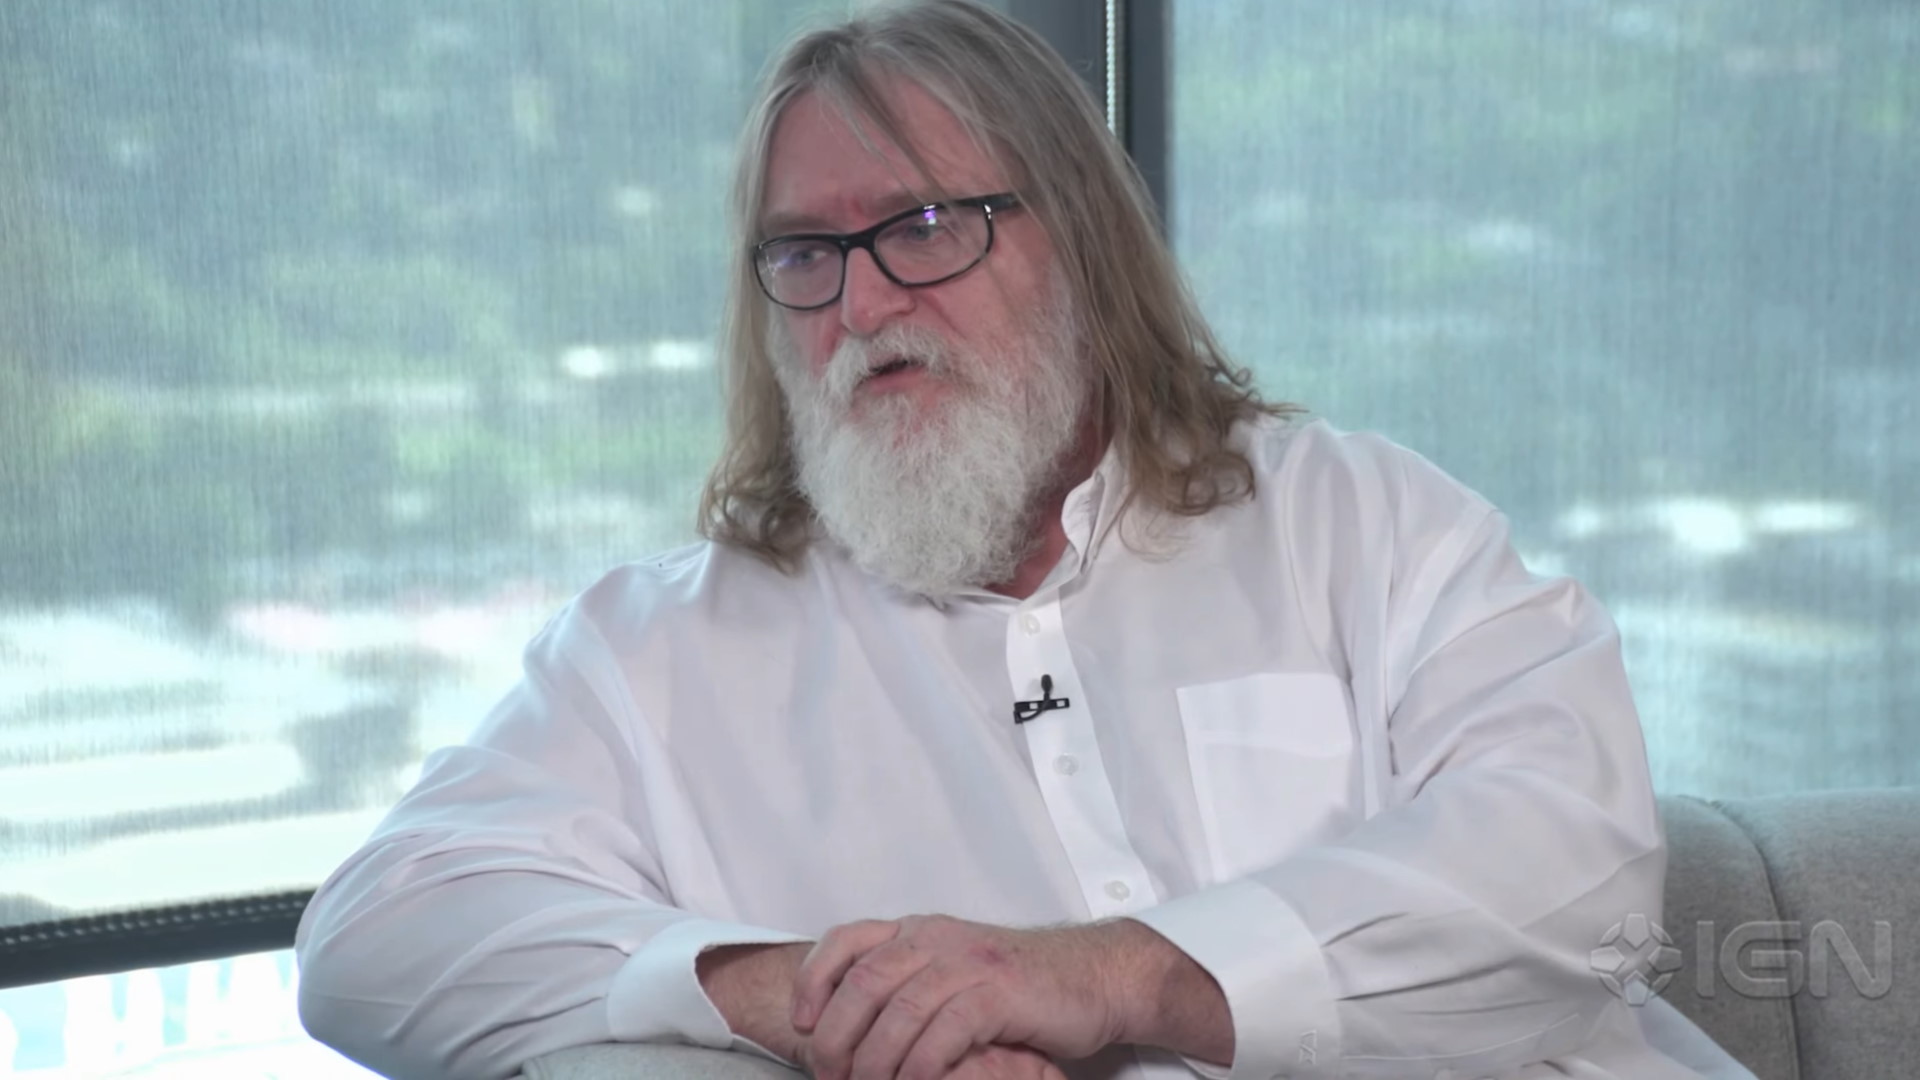 Steam Boss Gabe Newell Is One of America's 100 Richest People